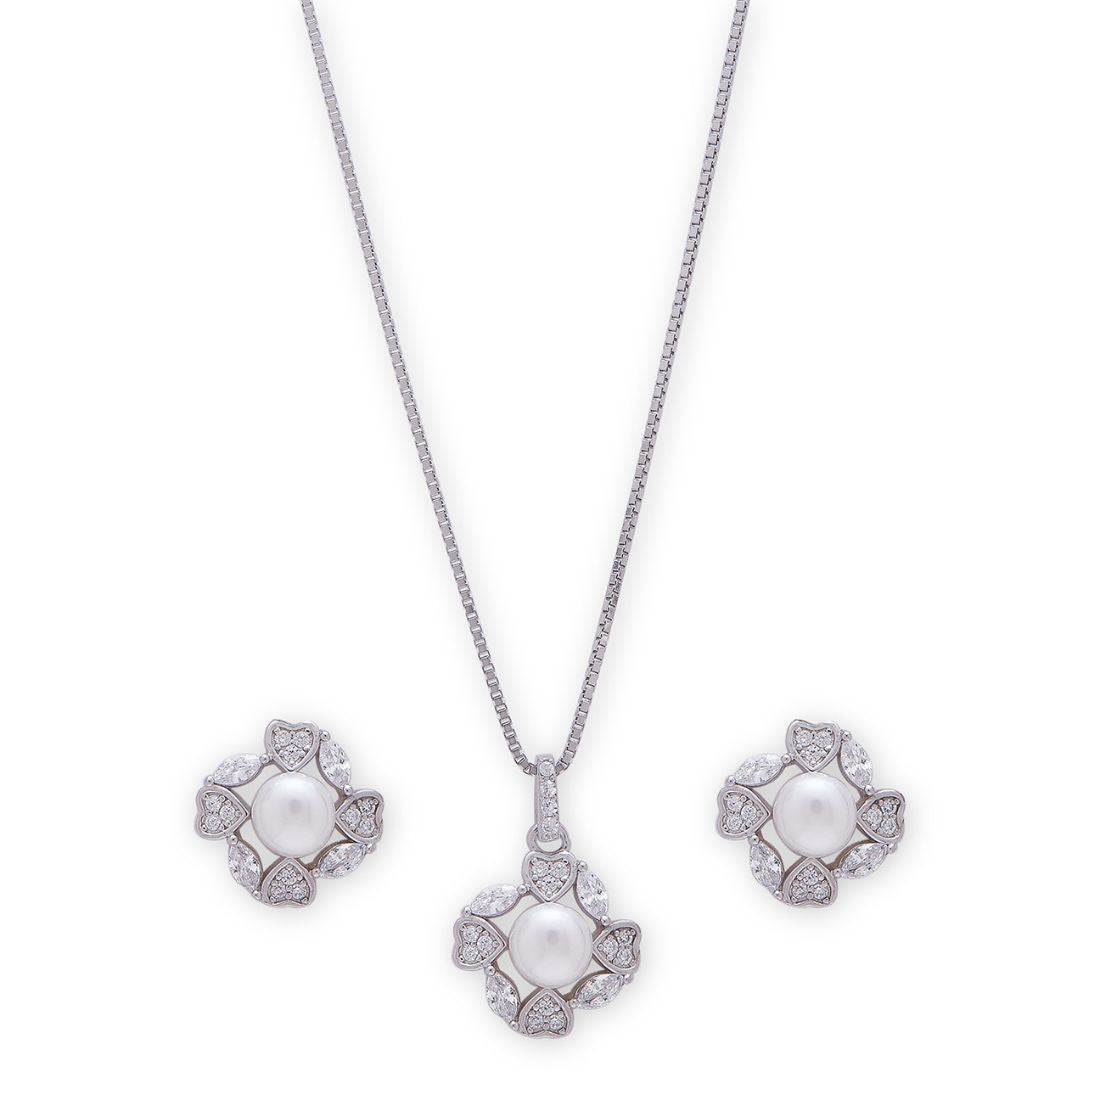 Petals of Eternity 925 Sterling Silver Rhodium-Plated Floral Jewelry Set